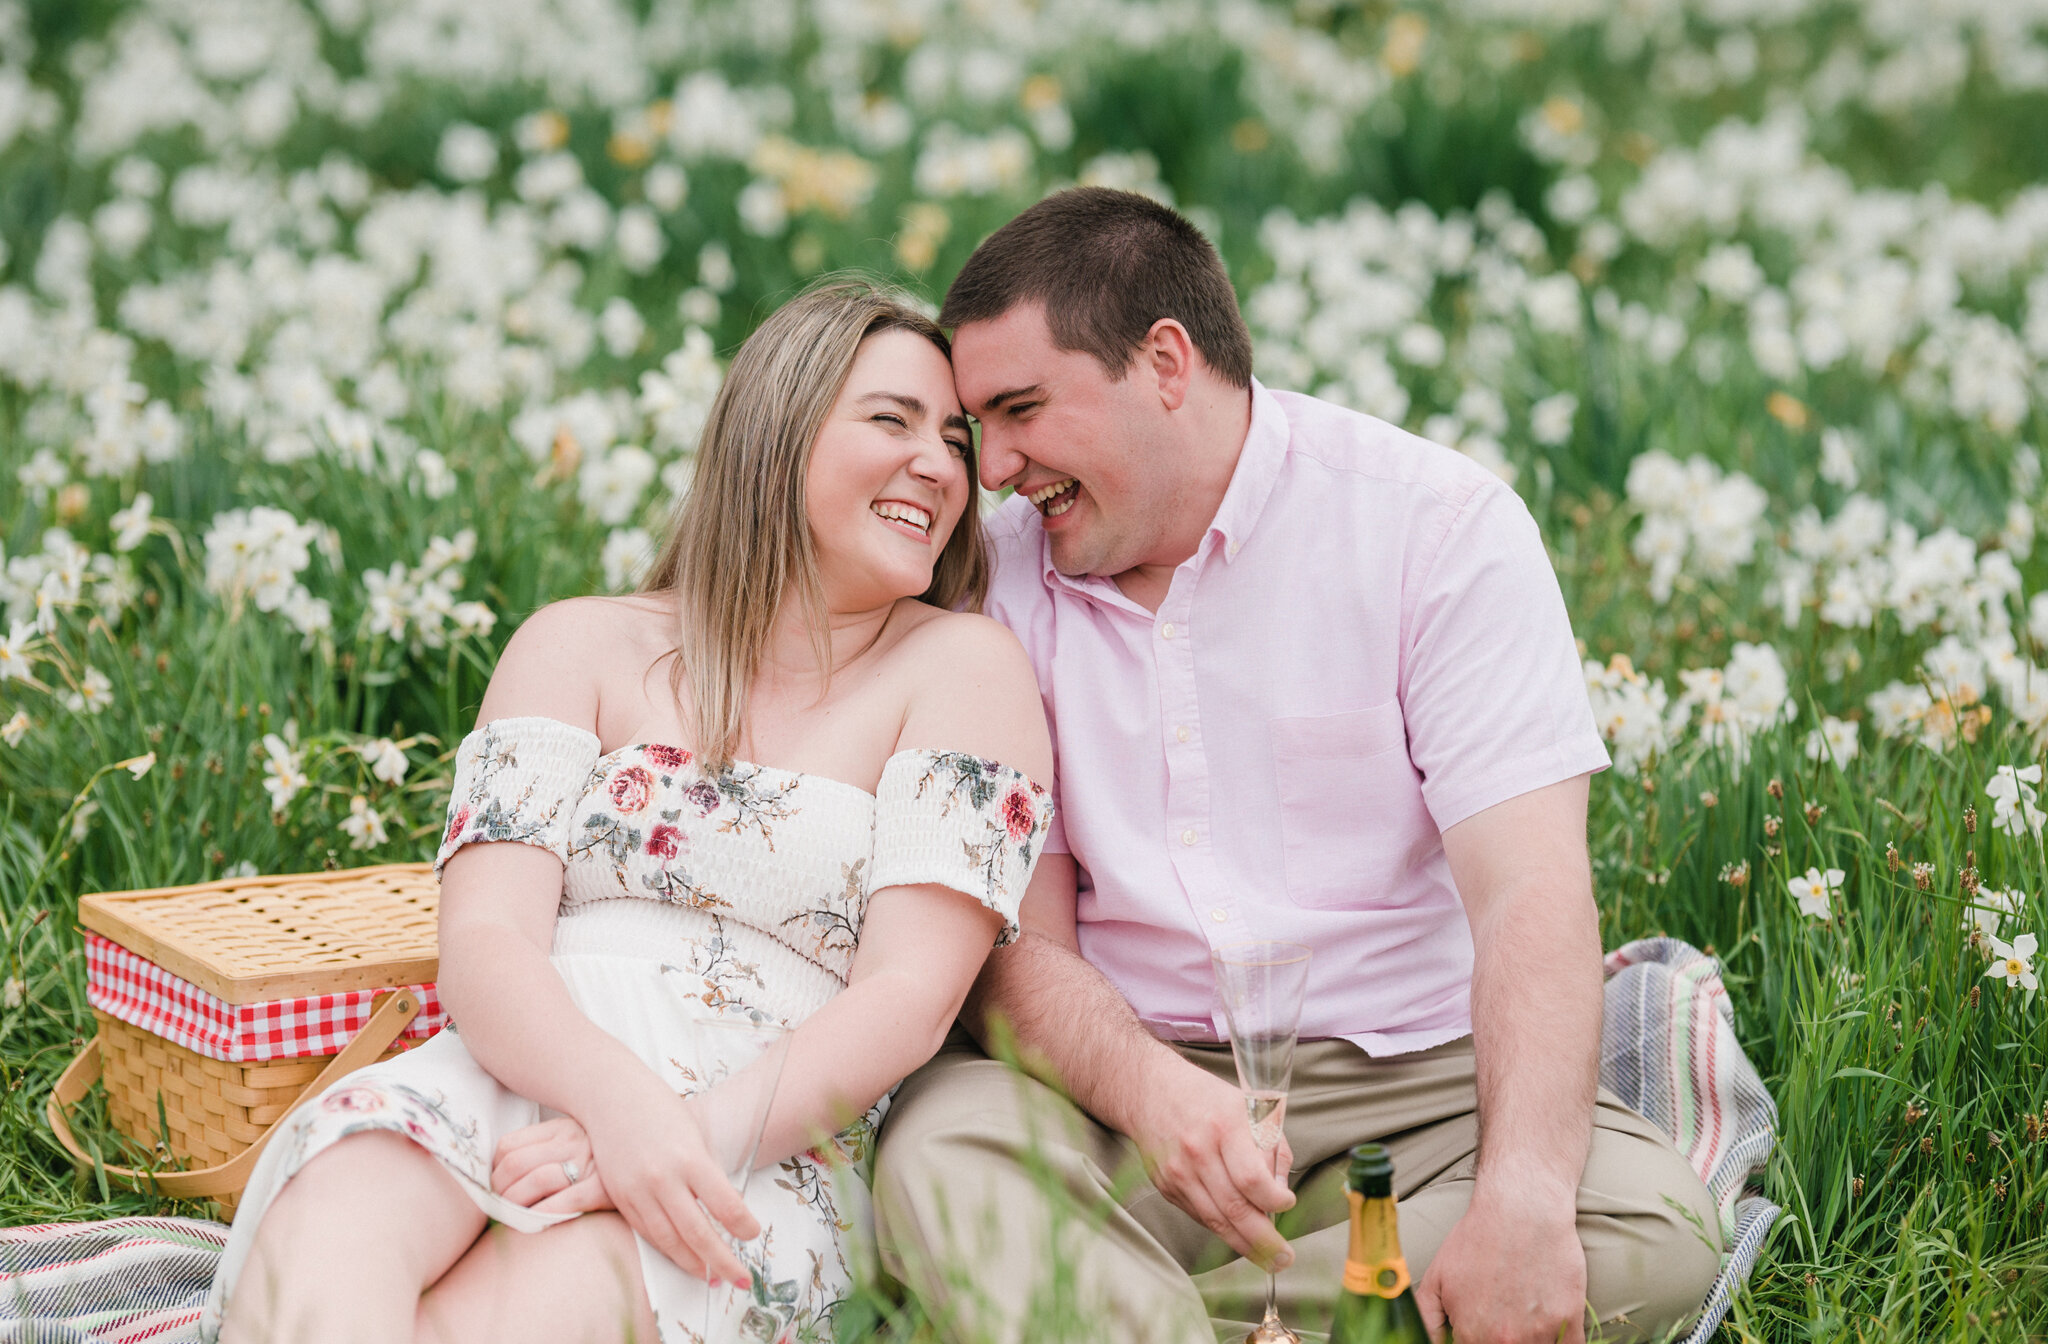 Beauty_and_Life_Captured_Taylor_and_Drew_Engagement-50.jpg